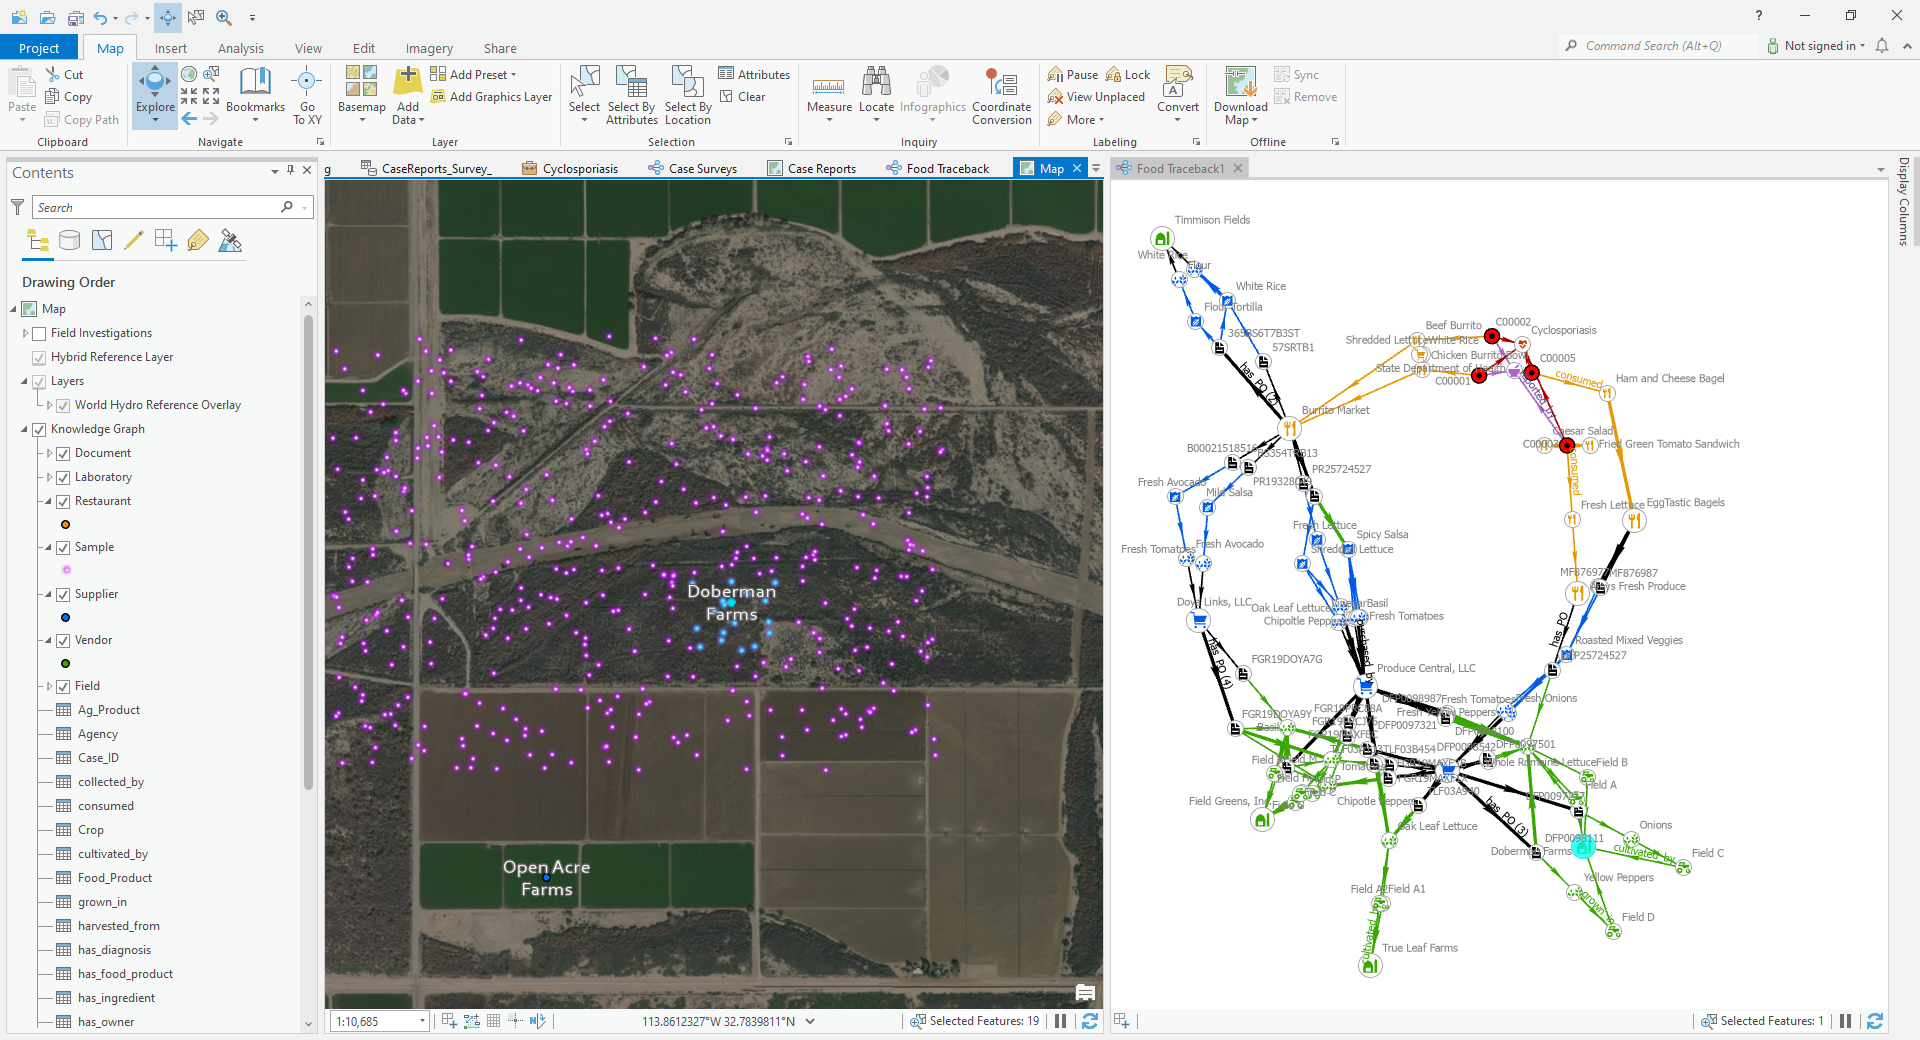 Esri product called ArcGIS Knowledge that nables users to explore and analyze spatial, nonspatial, unstructured, and structured data to accelerate decision-making